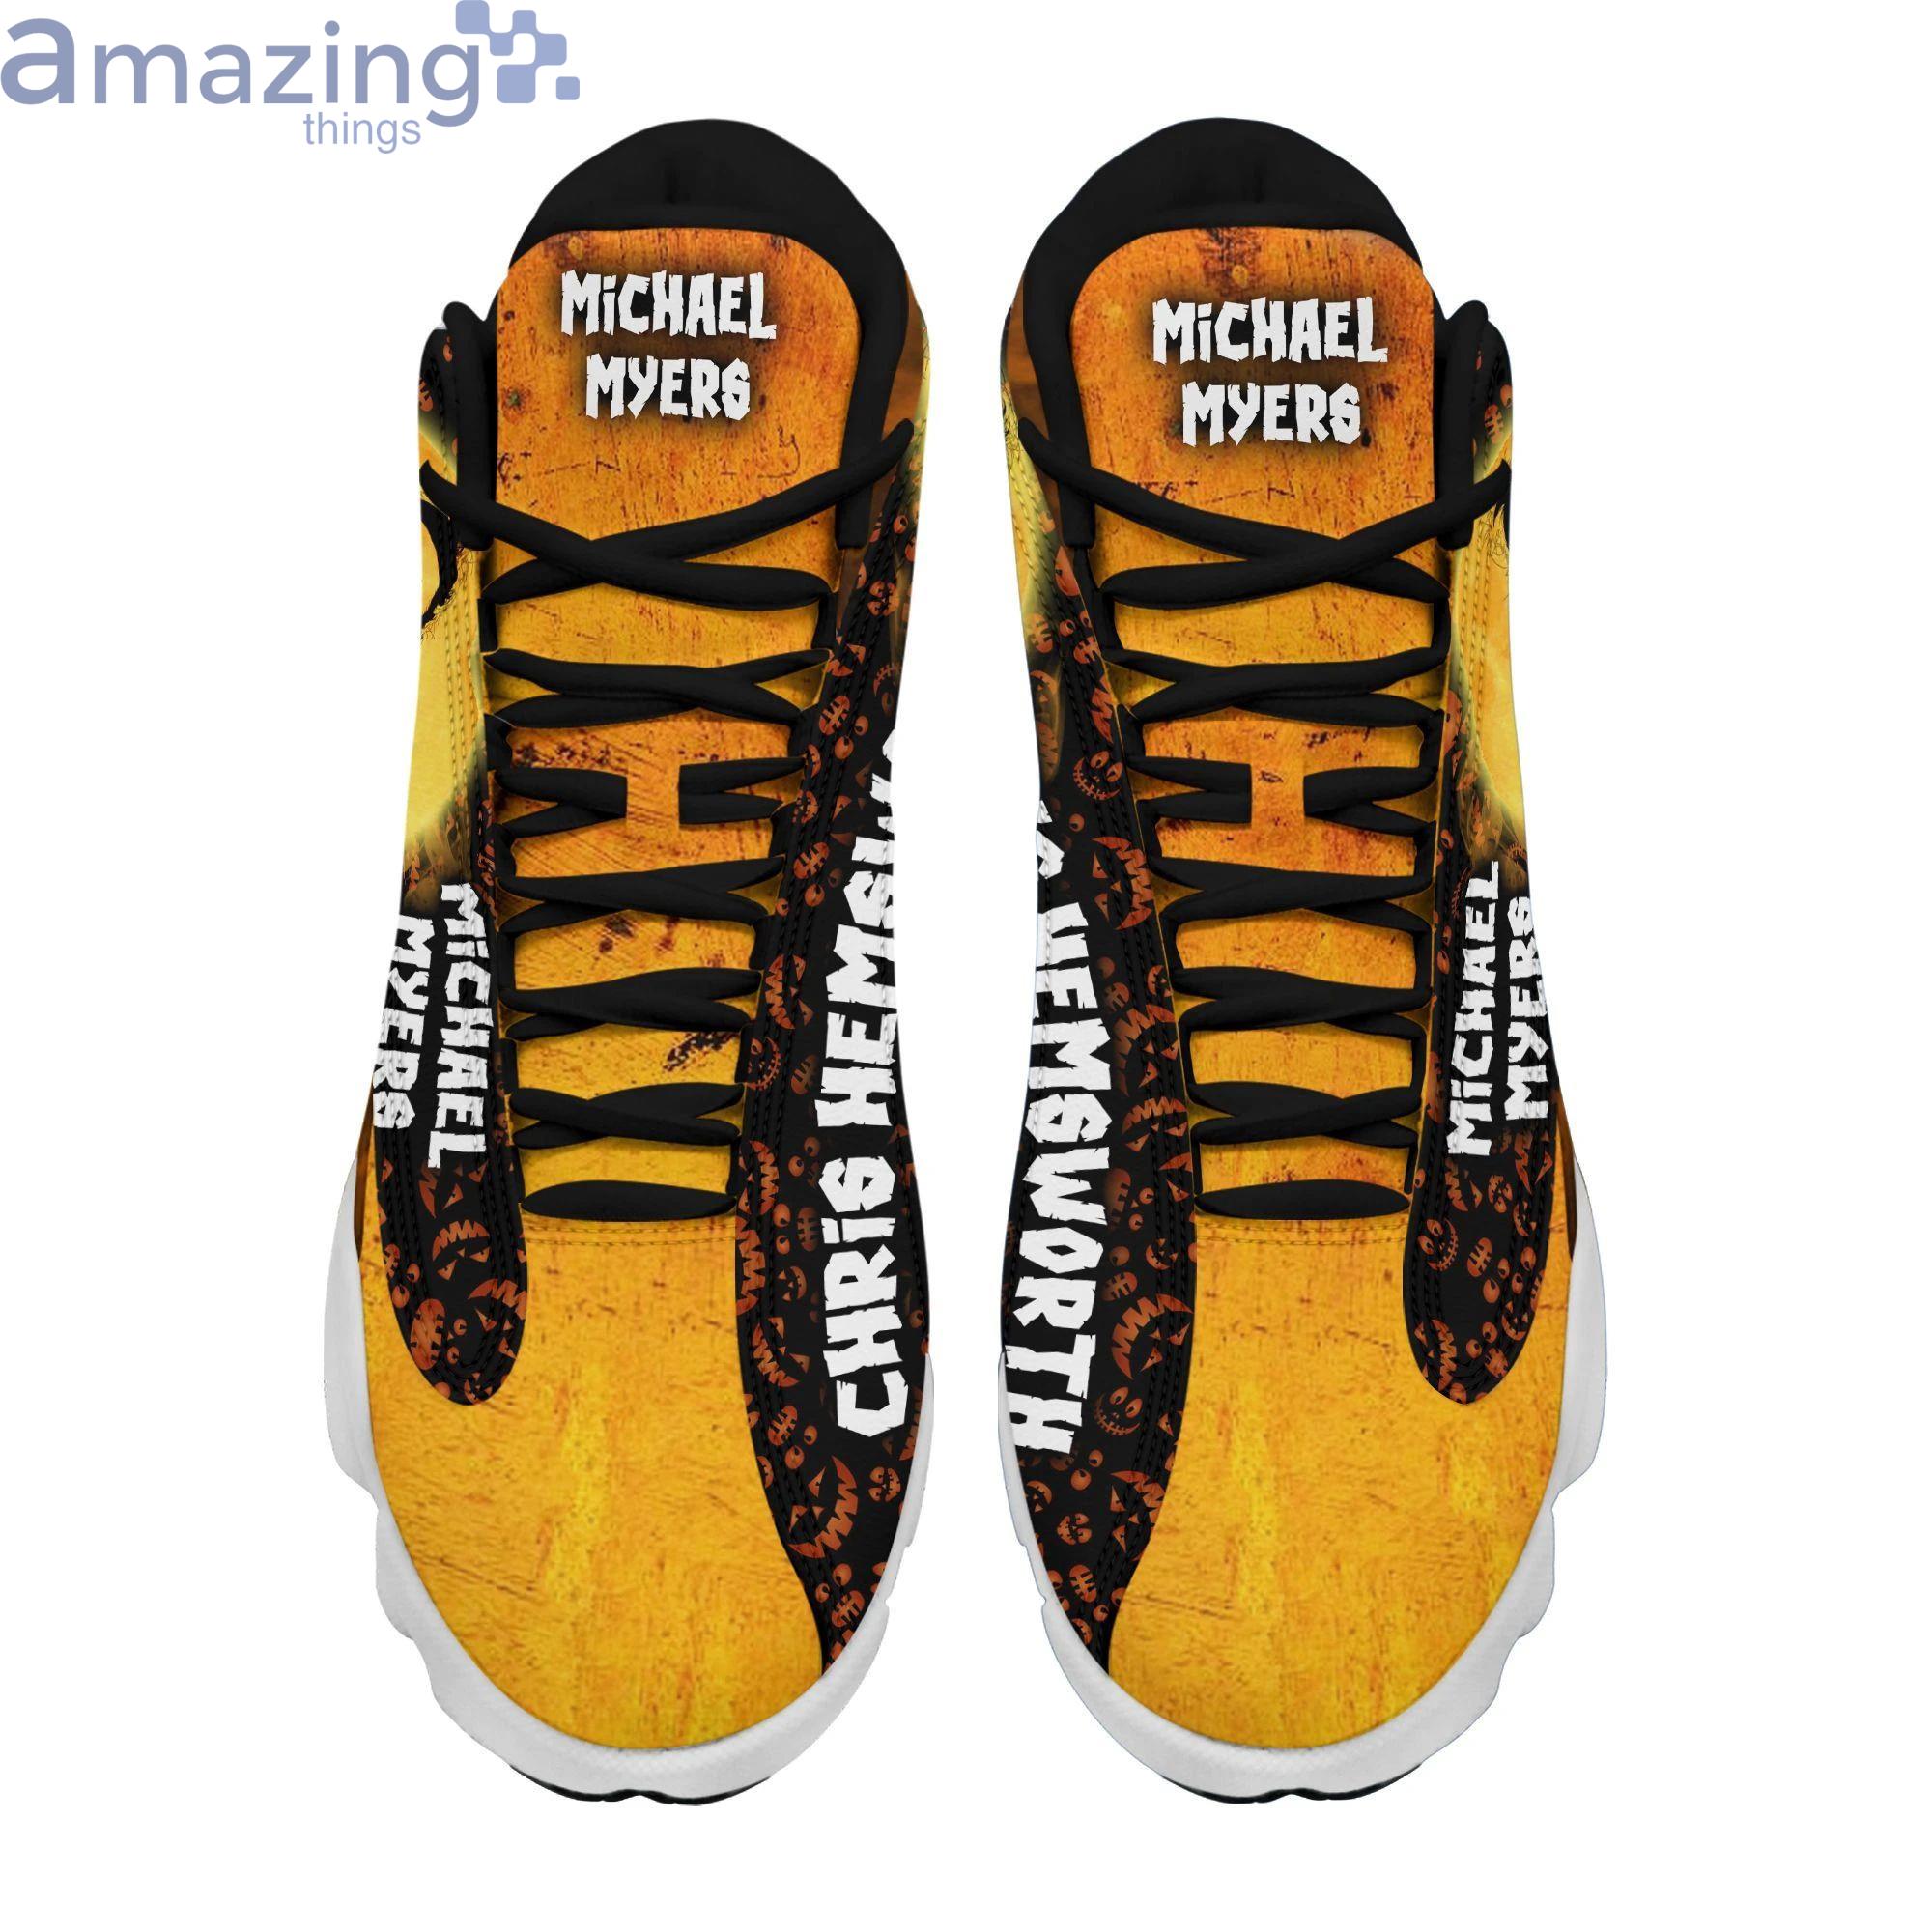 Personalized Michael Myers Halloween Night Air Jordan 13 Shoes Product Photo 1